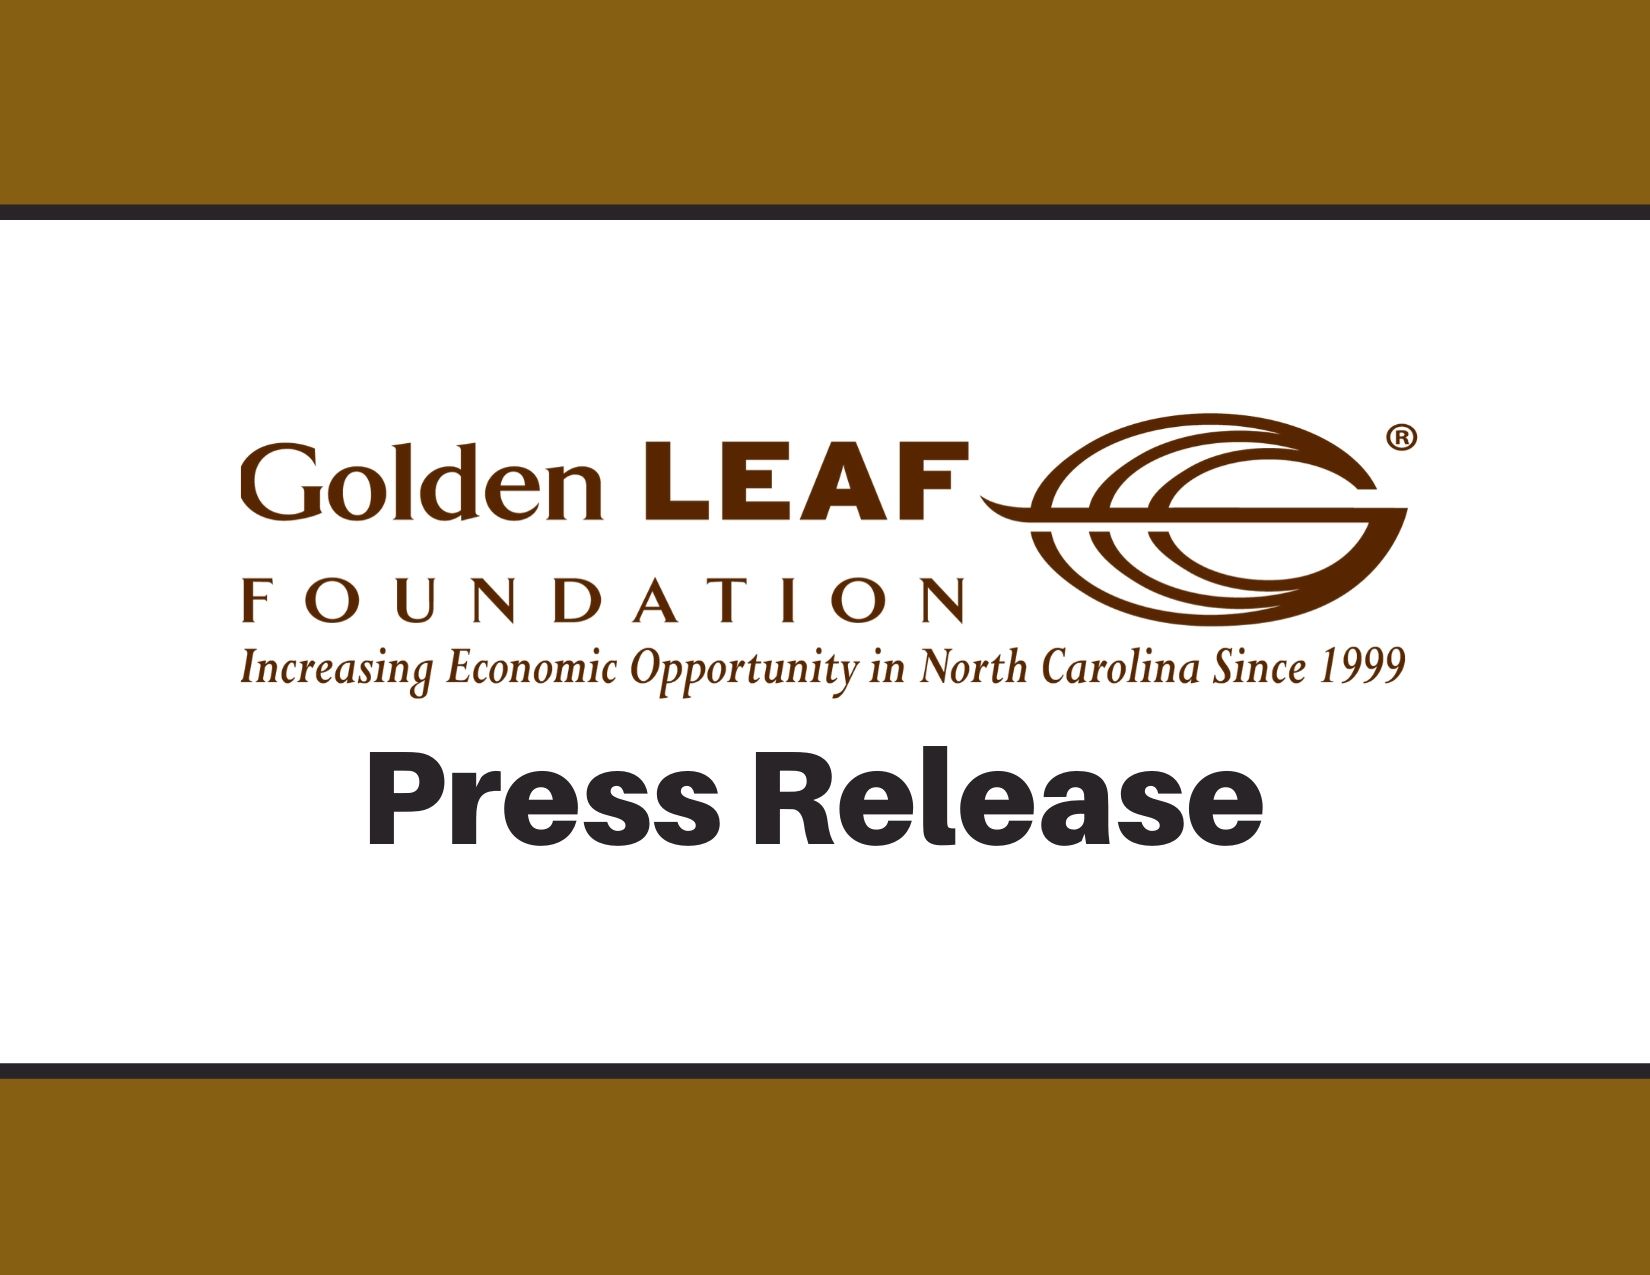 Golden LEAF deploys $15M in funding to launch NC COVID-19 Rapid Recovery Loan Program